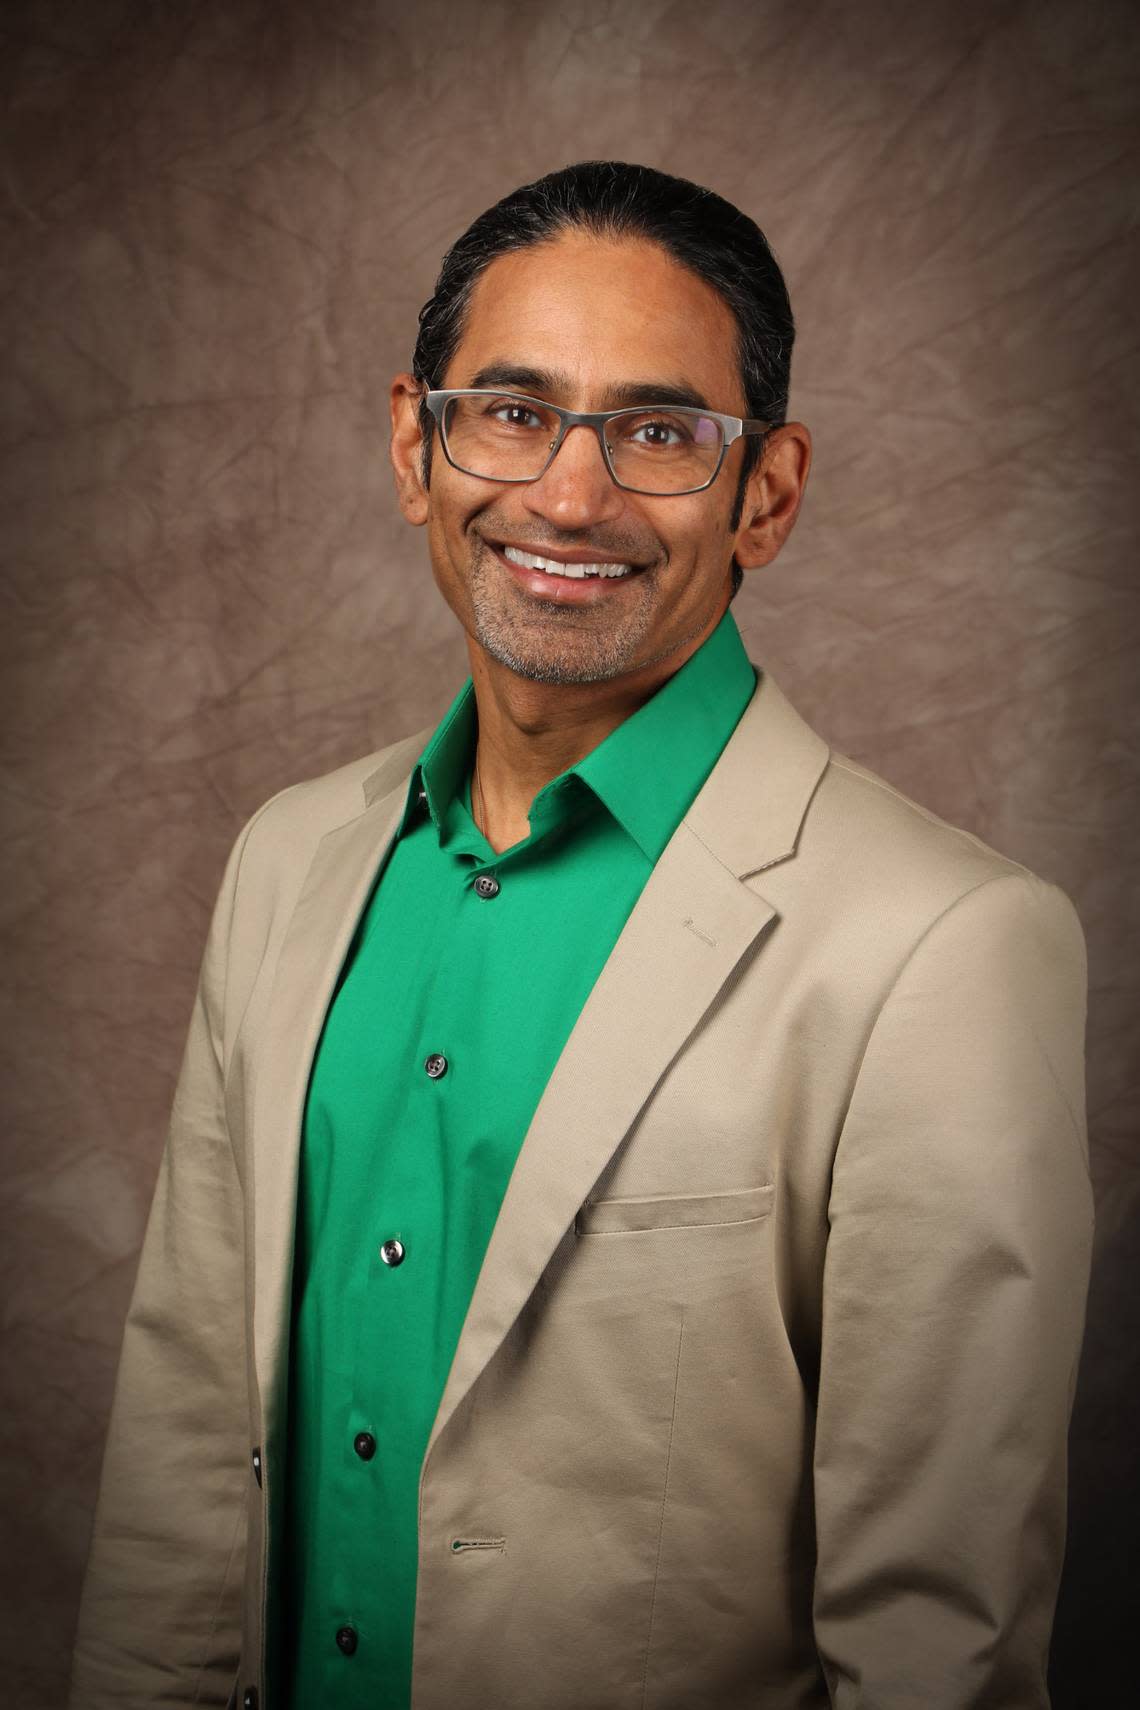 Atul Deshmane of Laurel is one of four candidates running for the at-large Position B seat on the Whatcom County Council in the Aug. 1, 2023, primary election.